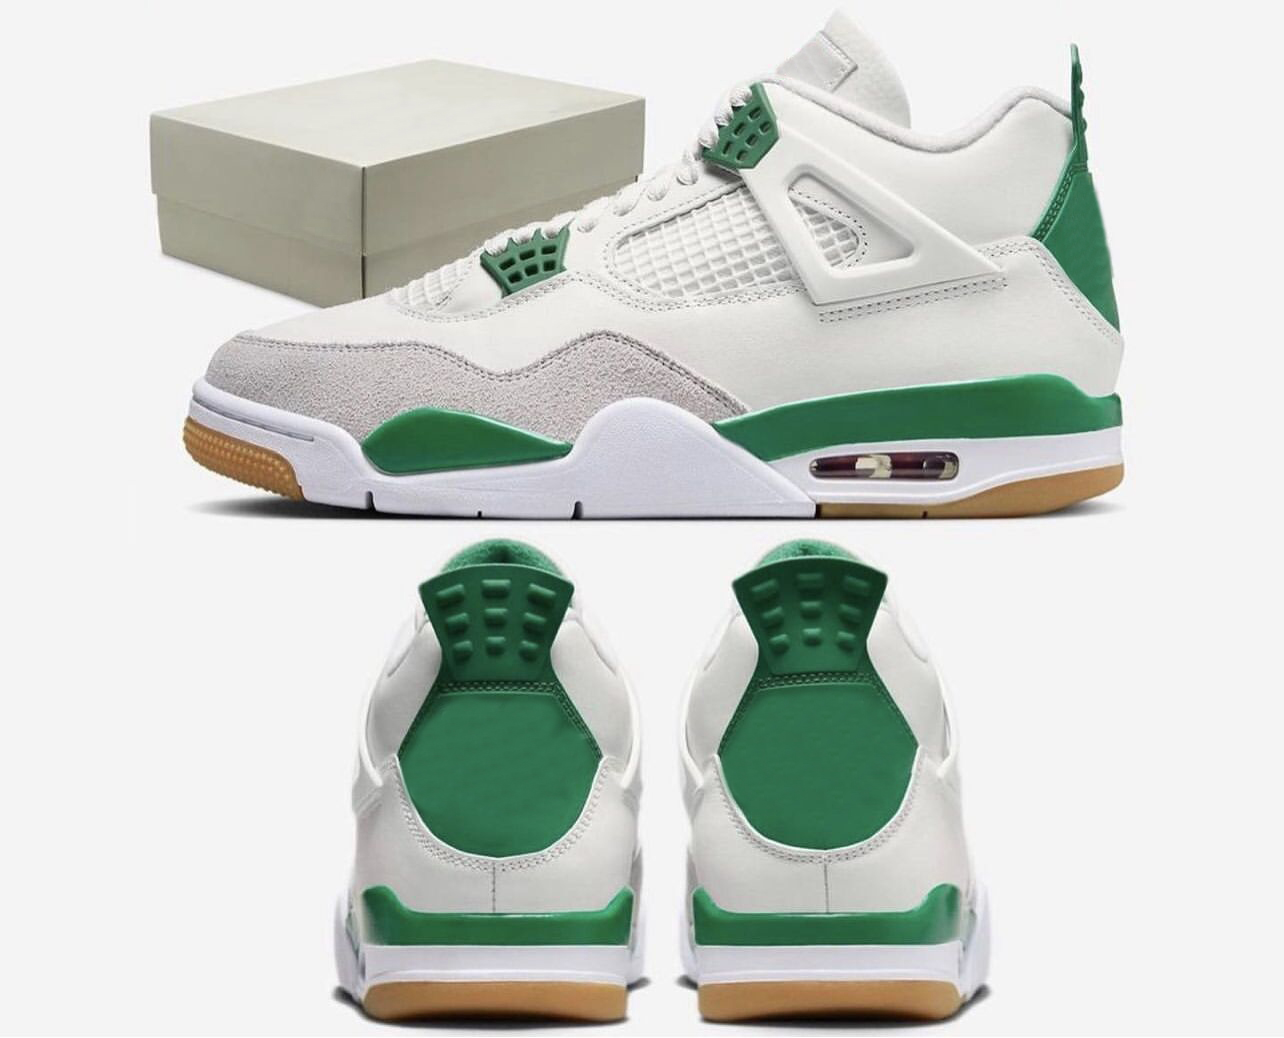 

2023 Authentic SB x 4 Pine Green Shoes White Leather Neutral Grey Suede Men Basketball Sports Sneakers With Original box DR5415-103 Size US7-13